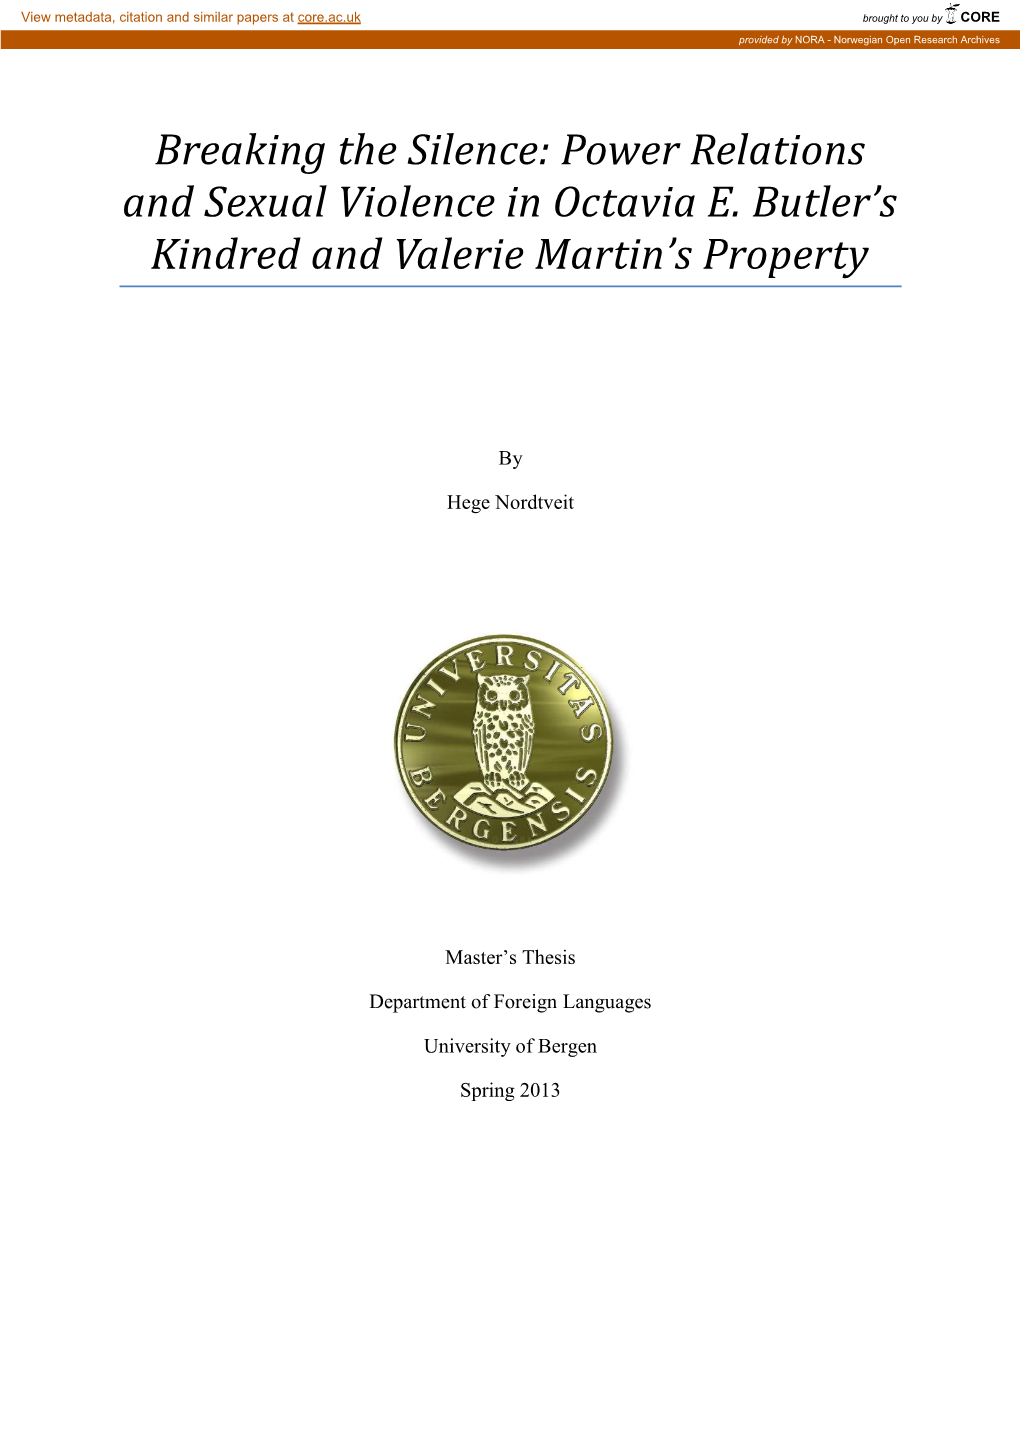 Power Relations and Sexual Violence in Octavia E. Butler's Kindred and Valerie Martin's Property